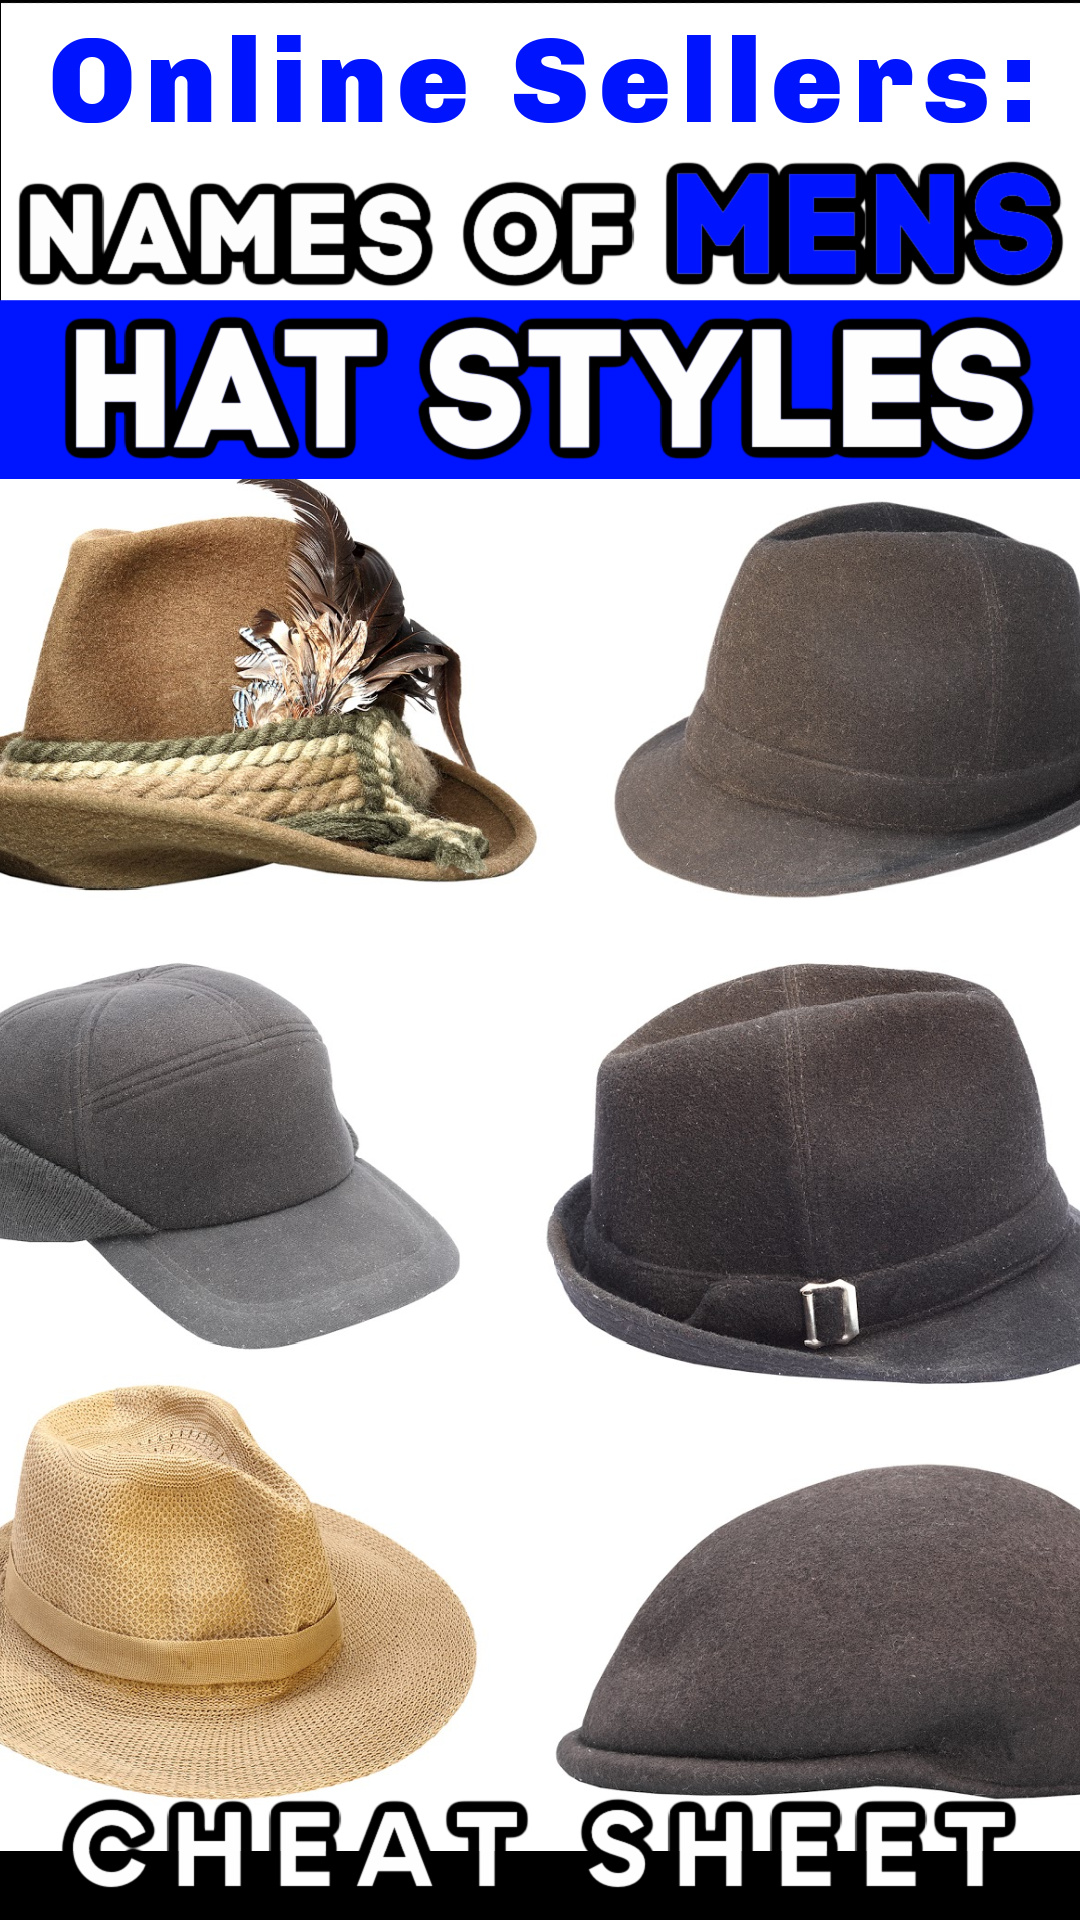 Online Sellers: NAMES of MENS HATS Styles (Cheat Sheet!) - Big Brand ...